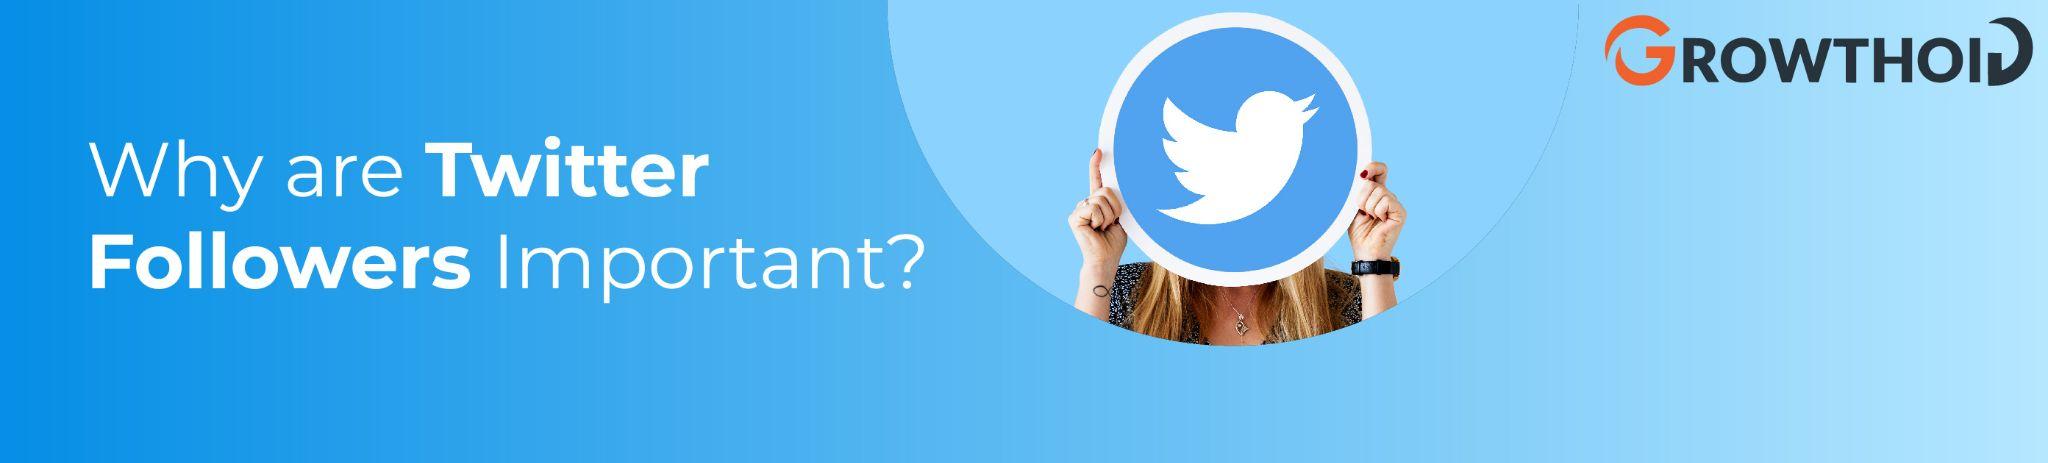 Why are Twitter Followers Important?